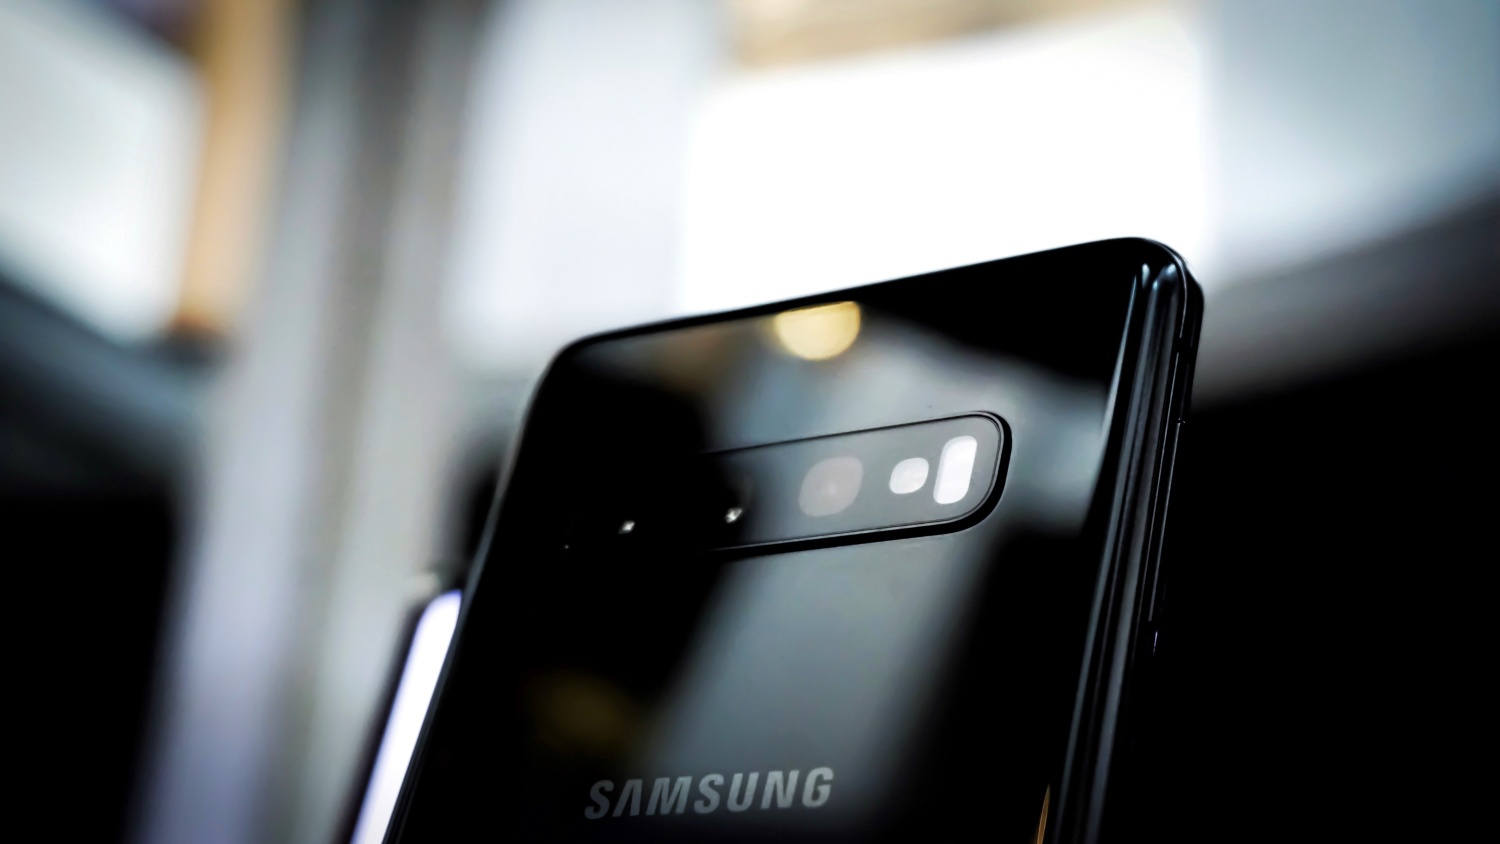 Android 10 Now on Samsung Devices; Here's What You Need to Know About This Update 